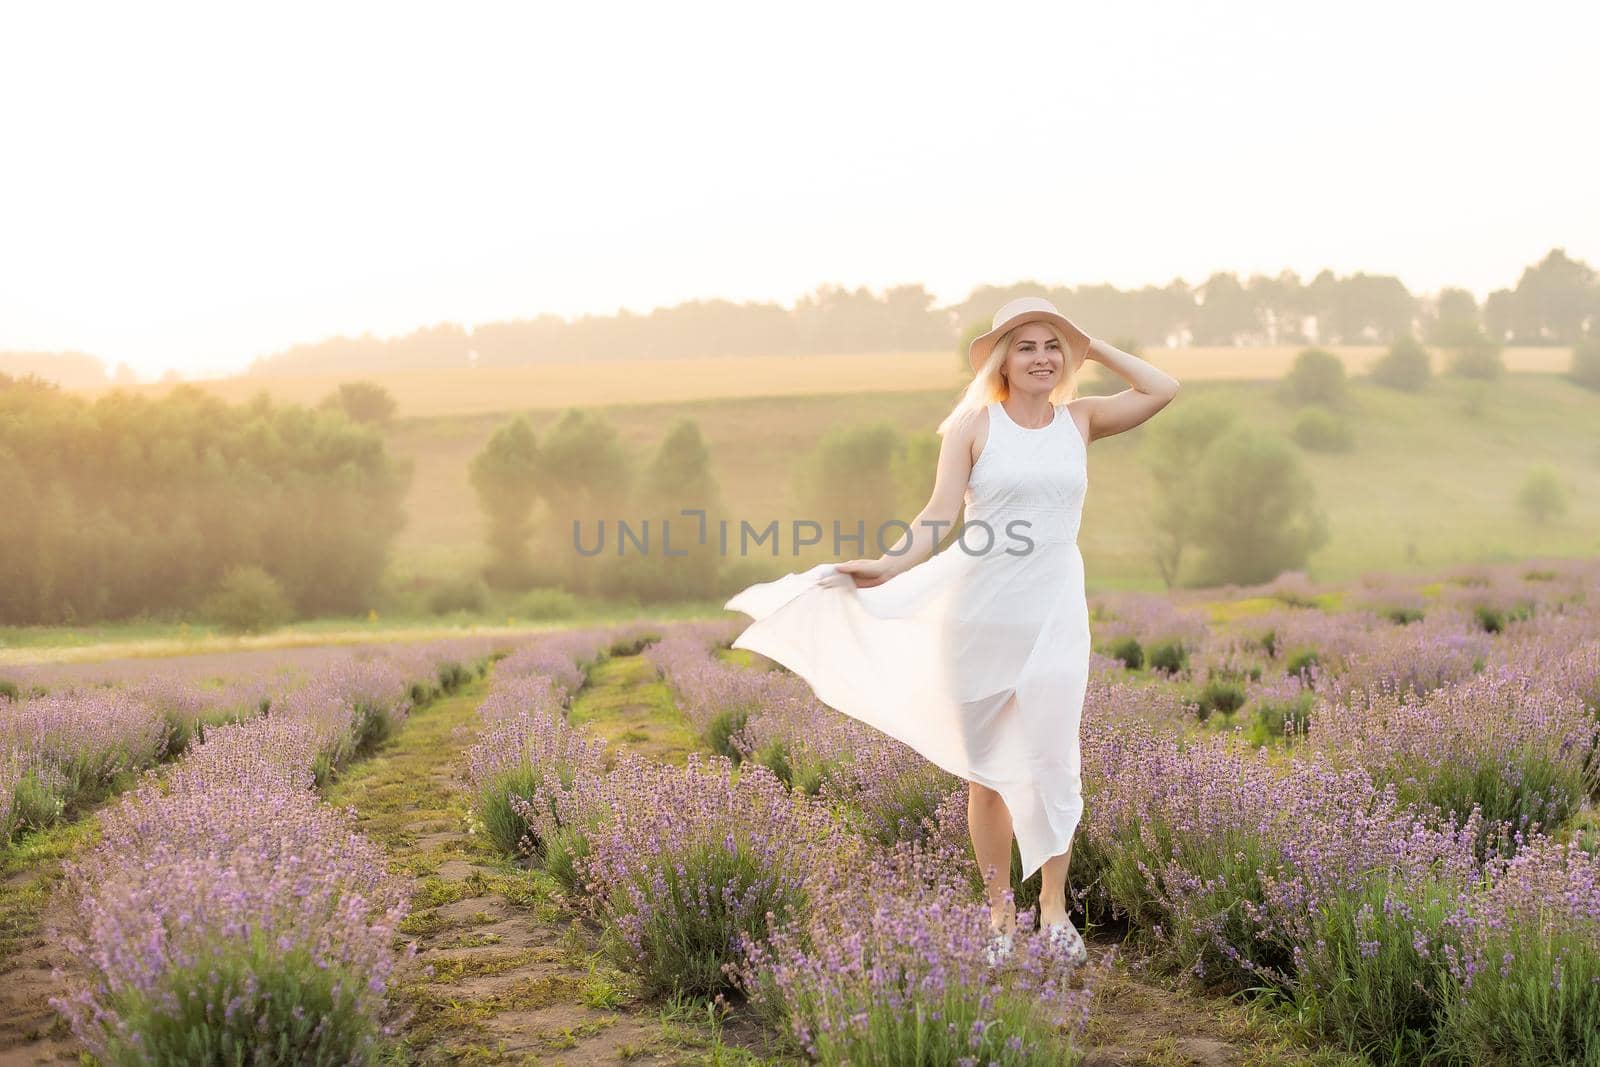 Beautiful young woman walking the field of lavender. Fashion outfit dress, straw hat